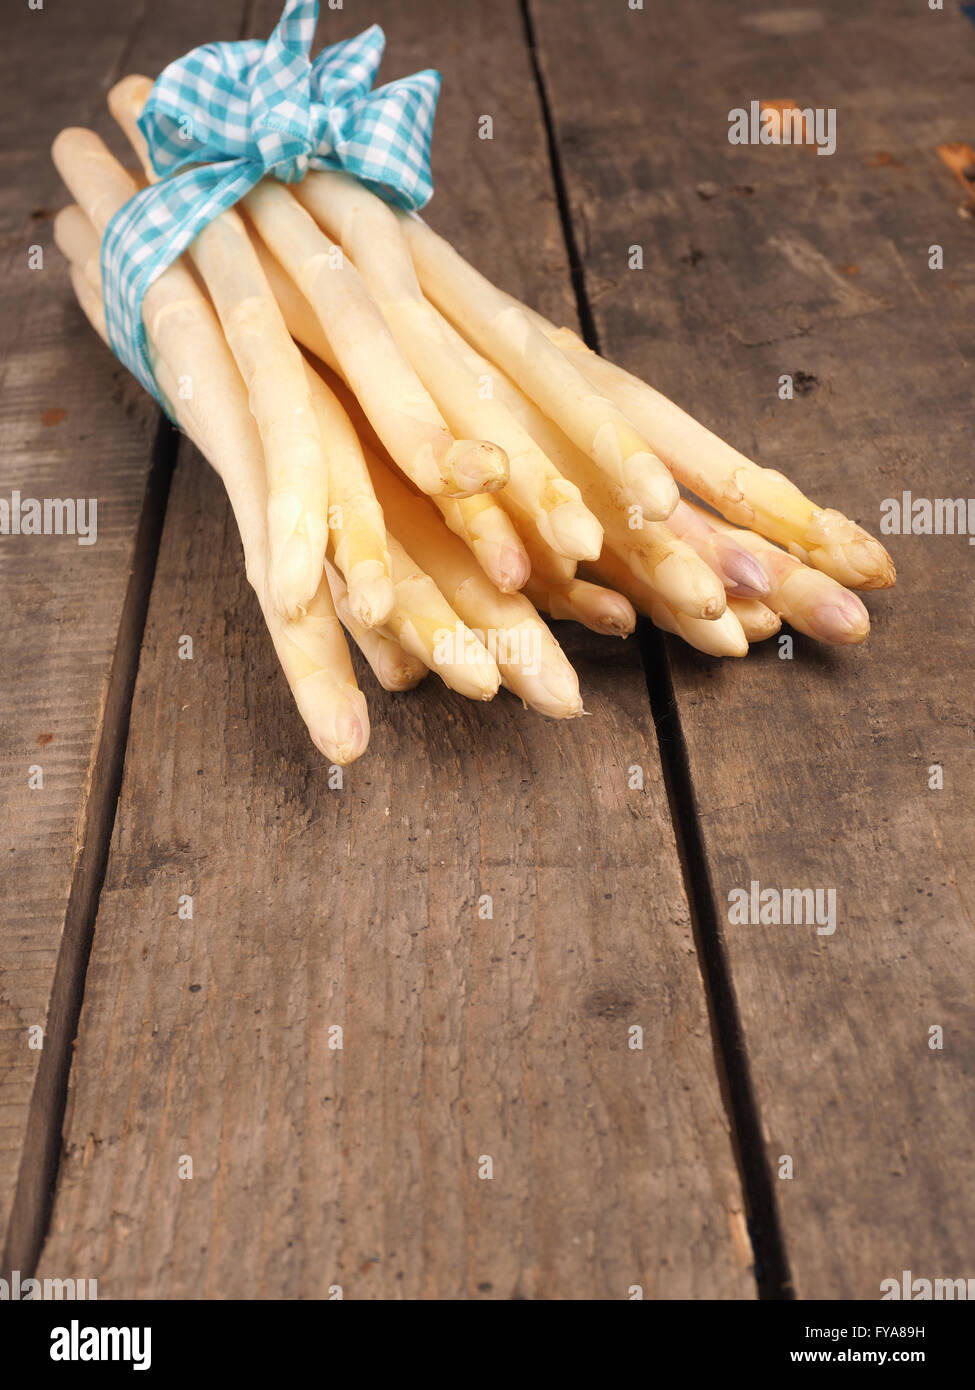 Bunch of white asparagus on an old wooden table Stock Photo